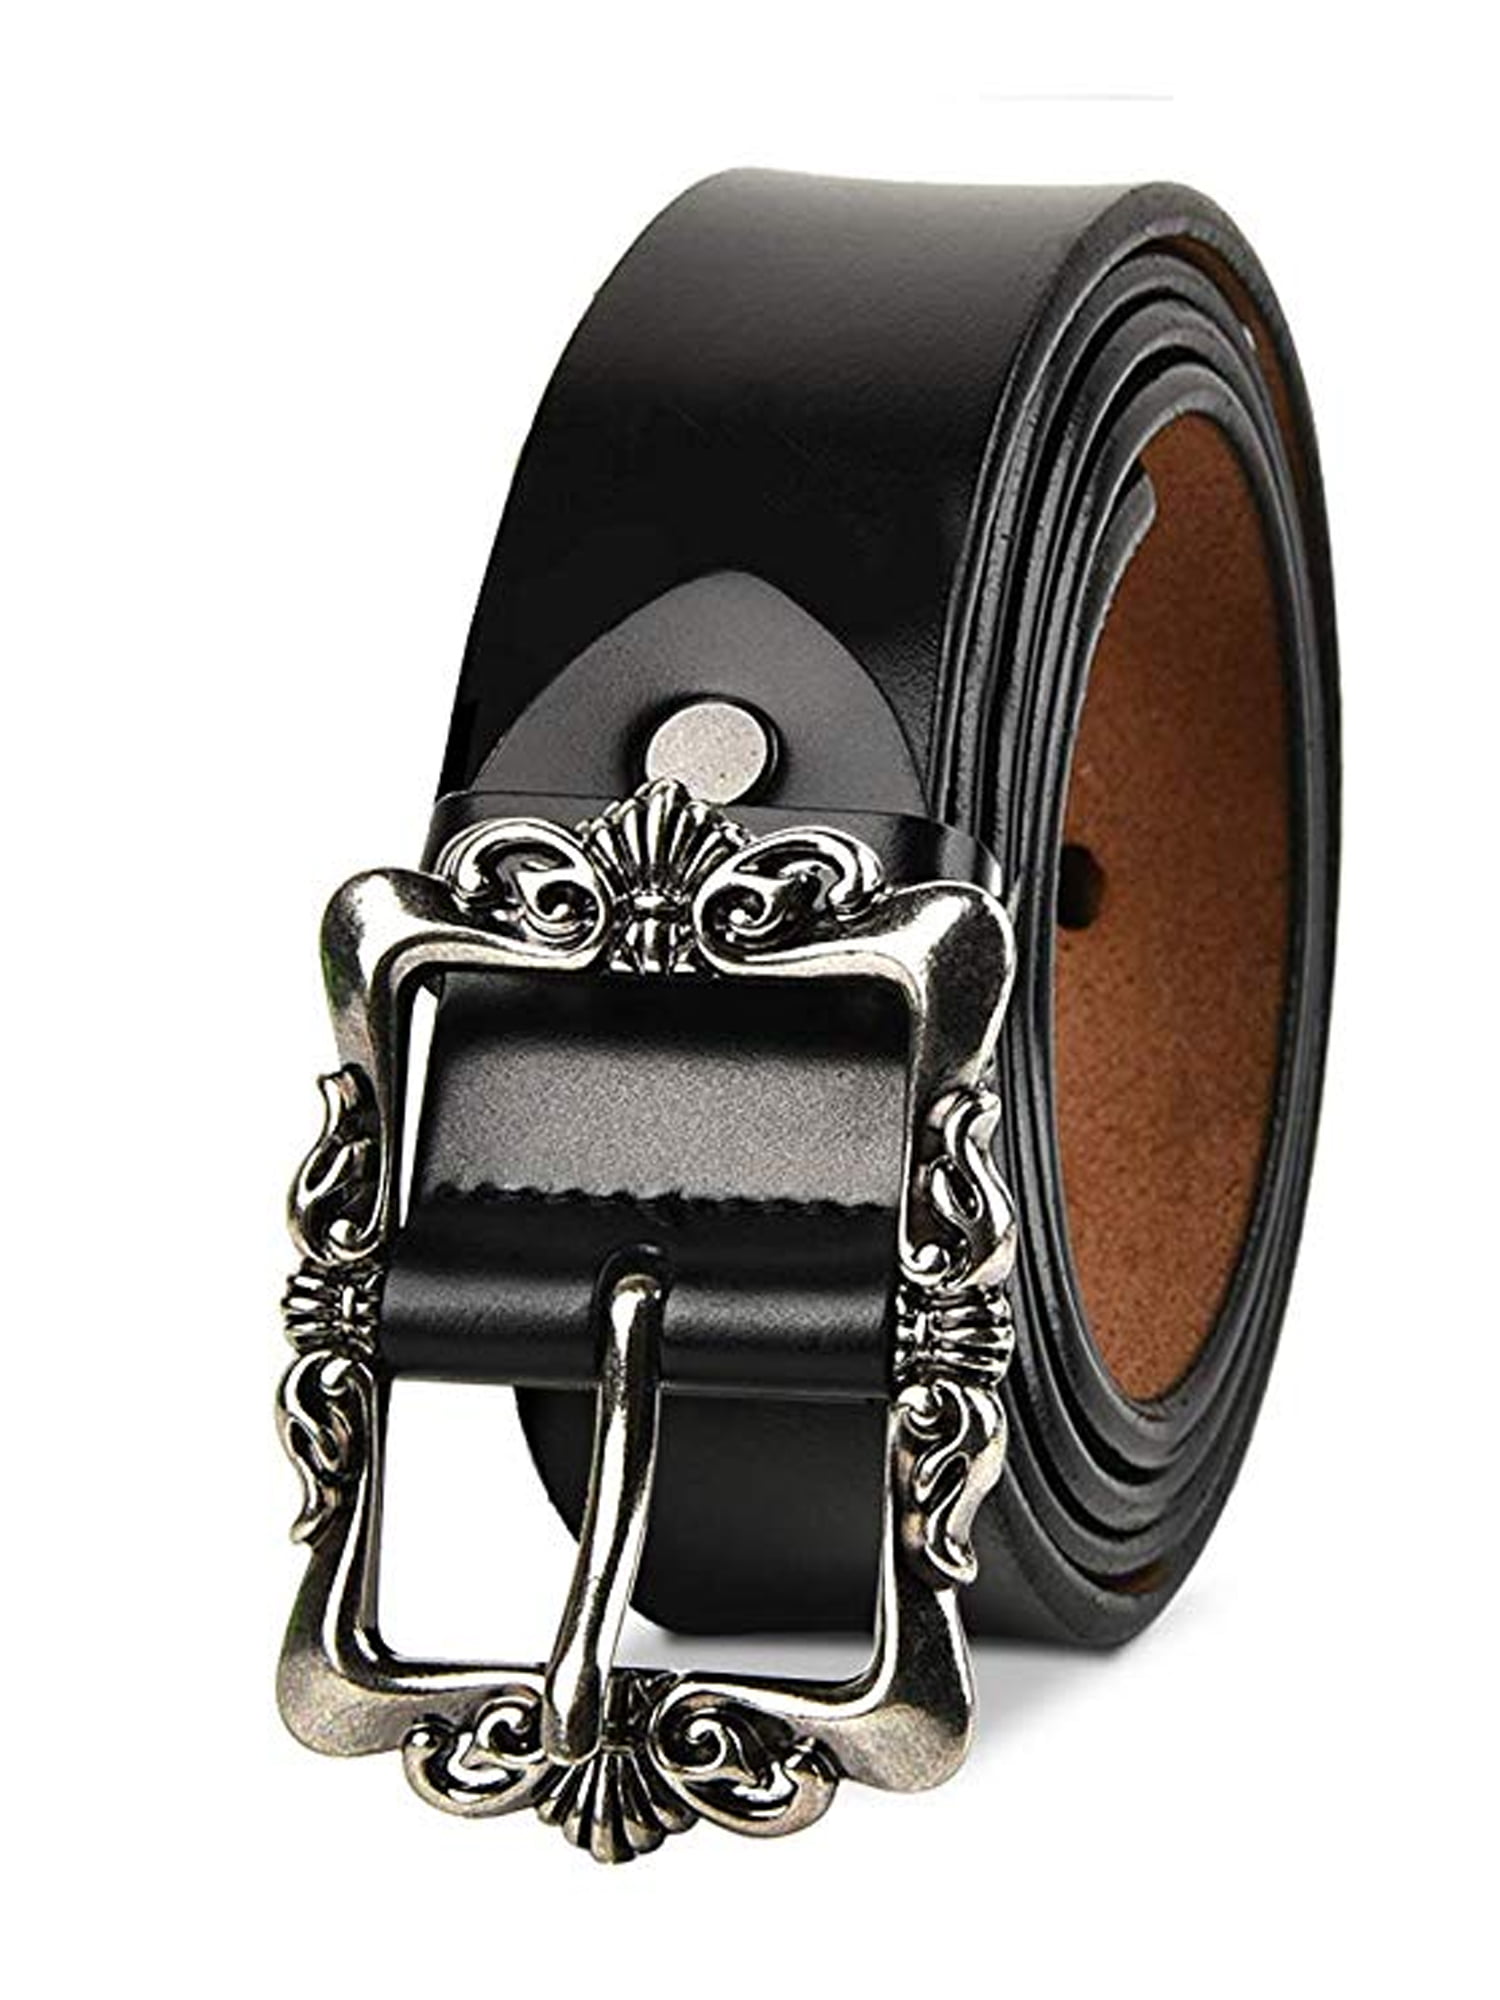 Women's Classic Buckle Handcrafted Genuine Leather Belt 